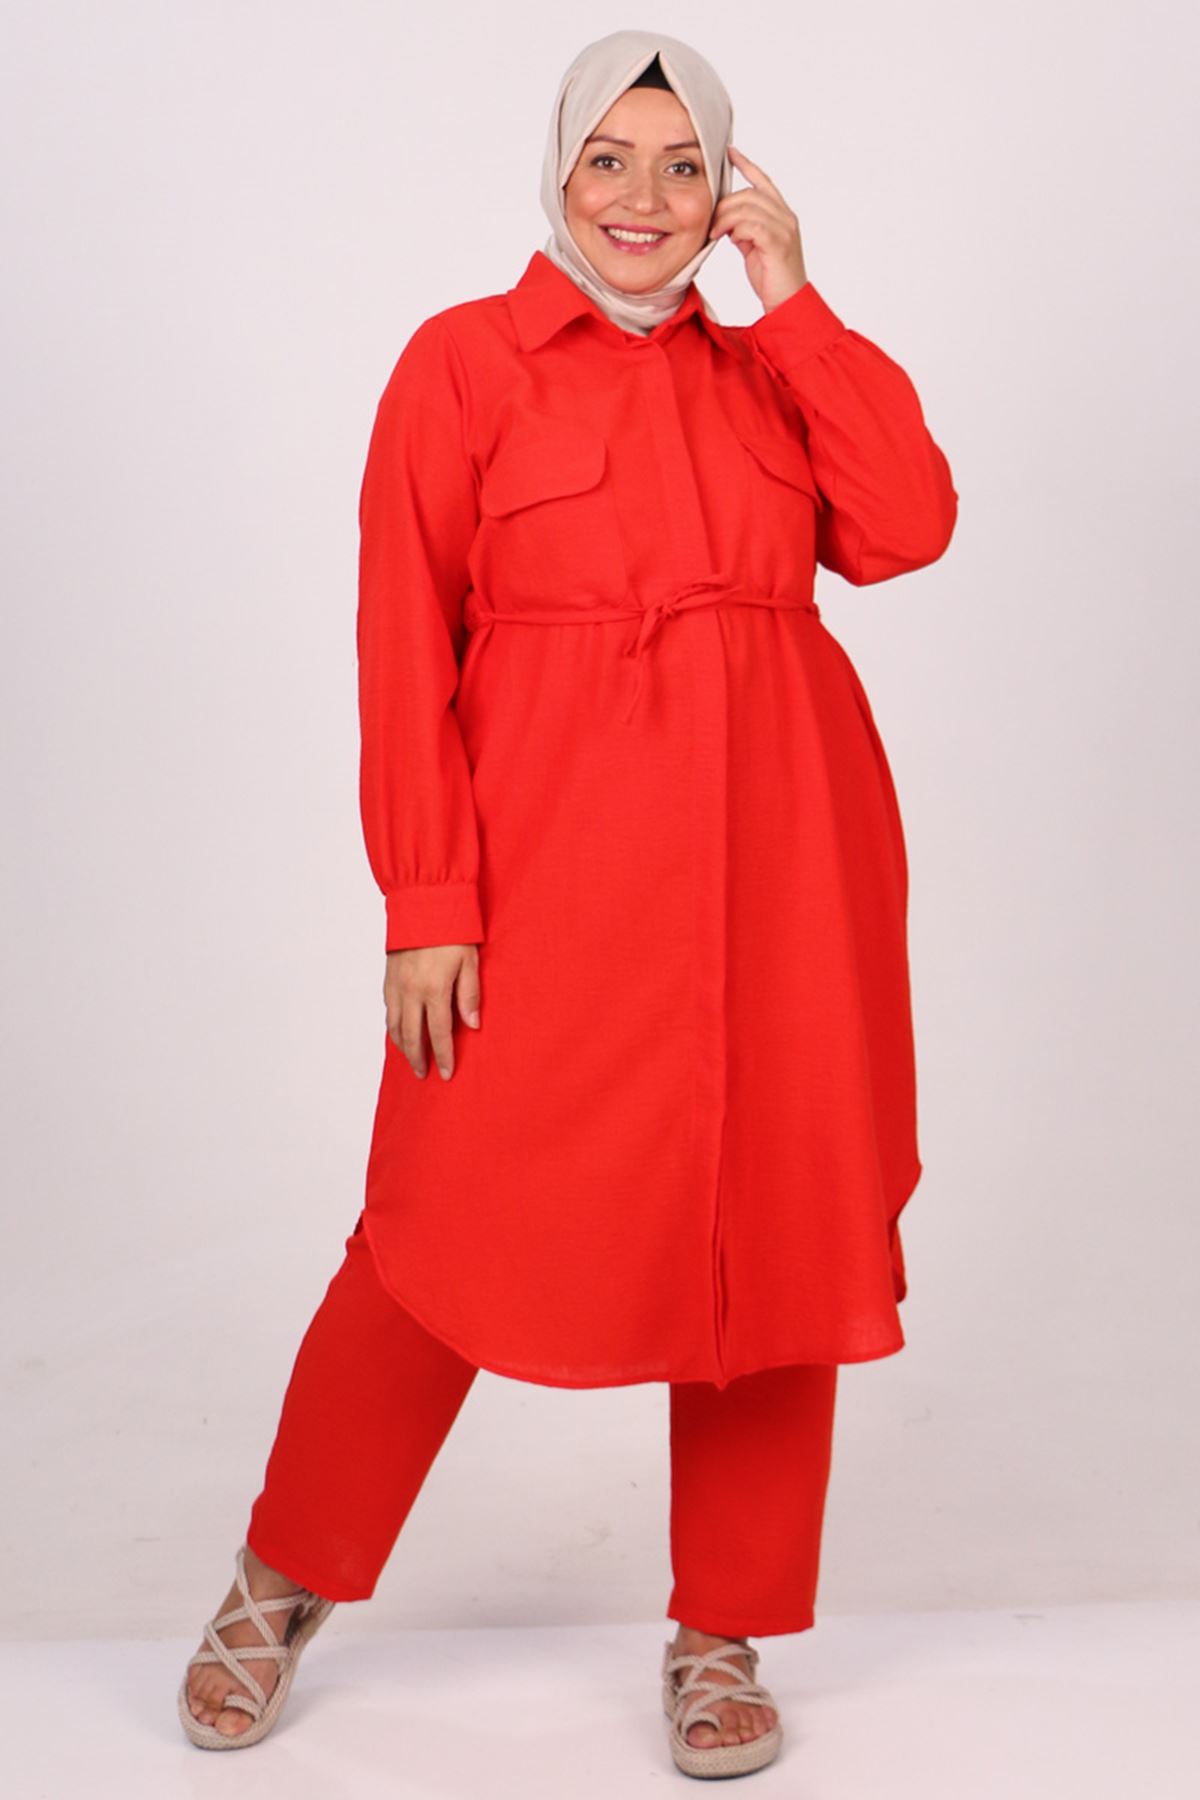 37029 Large Size Pocket Linen Airobin Trousers Set -Red